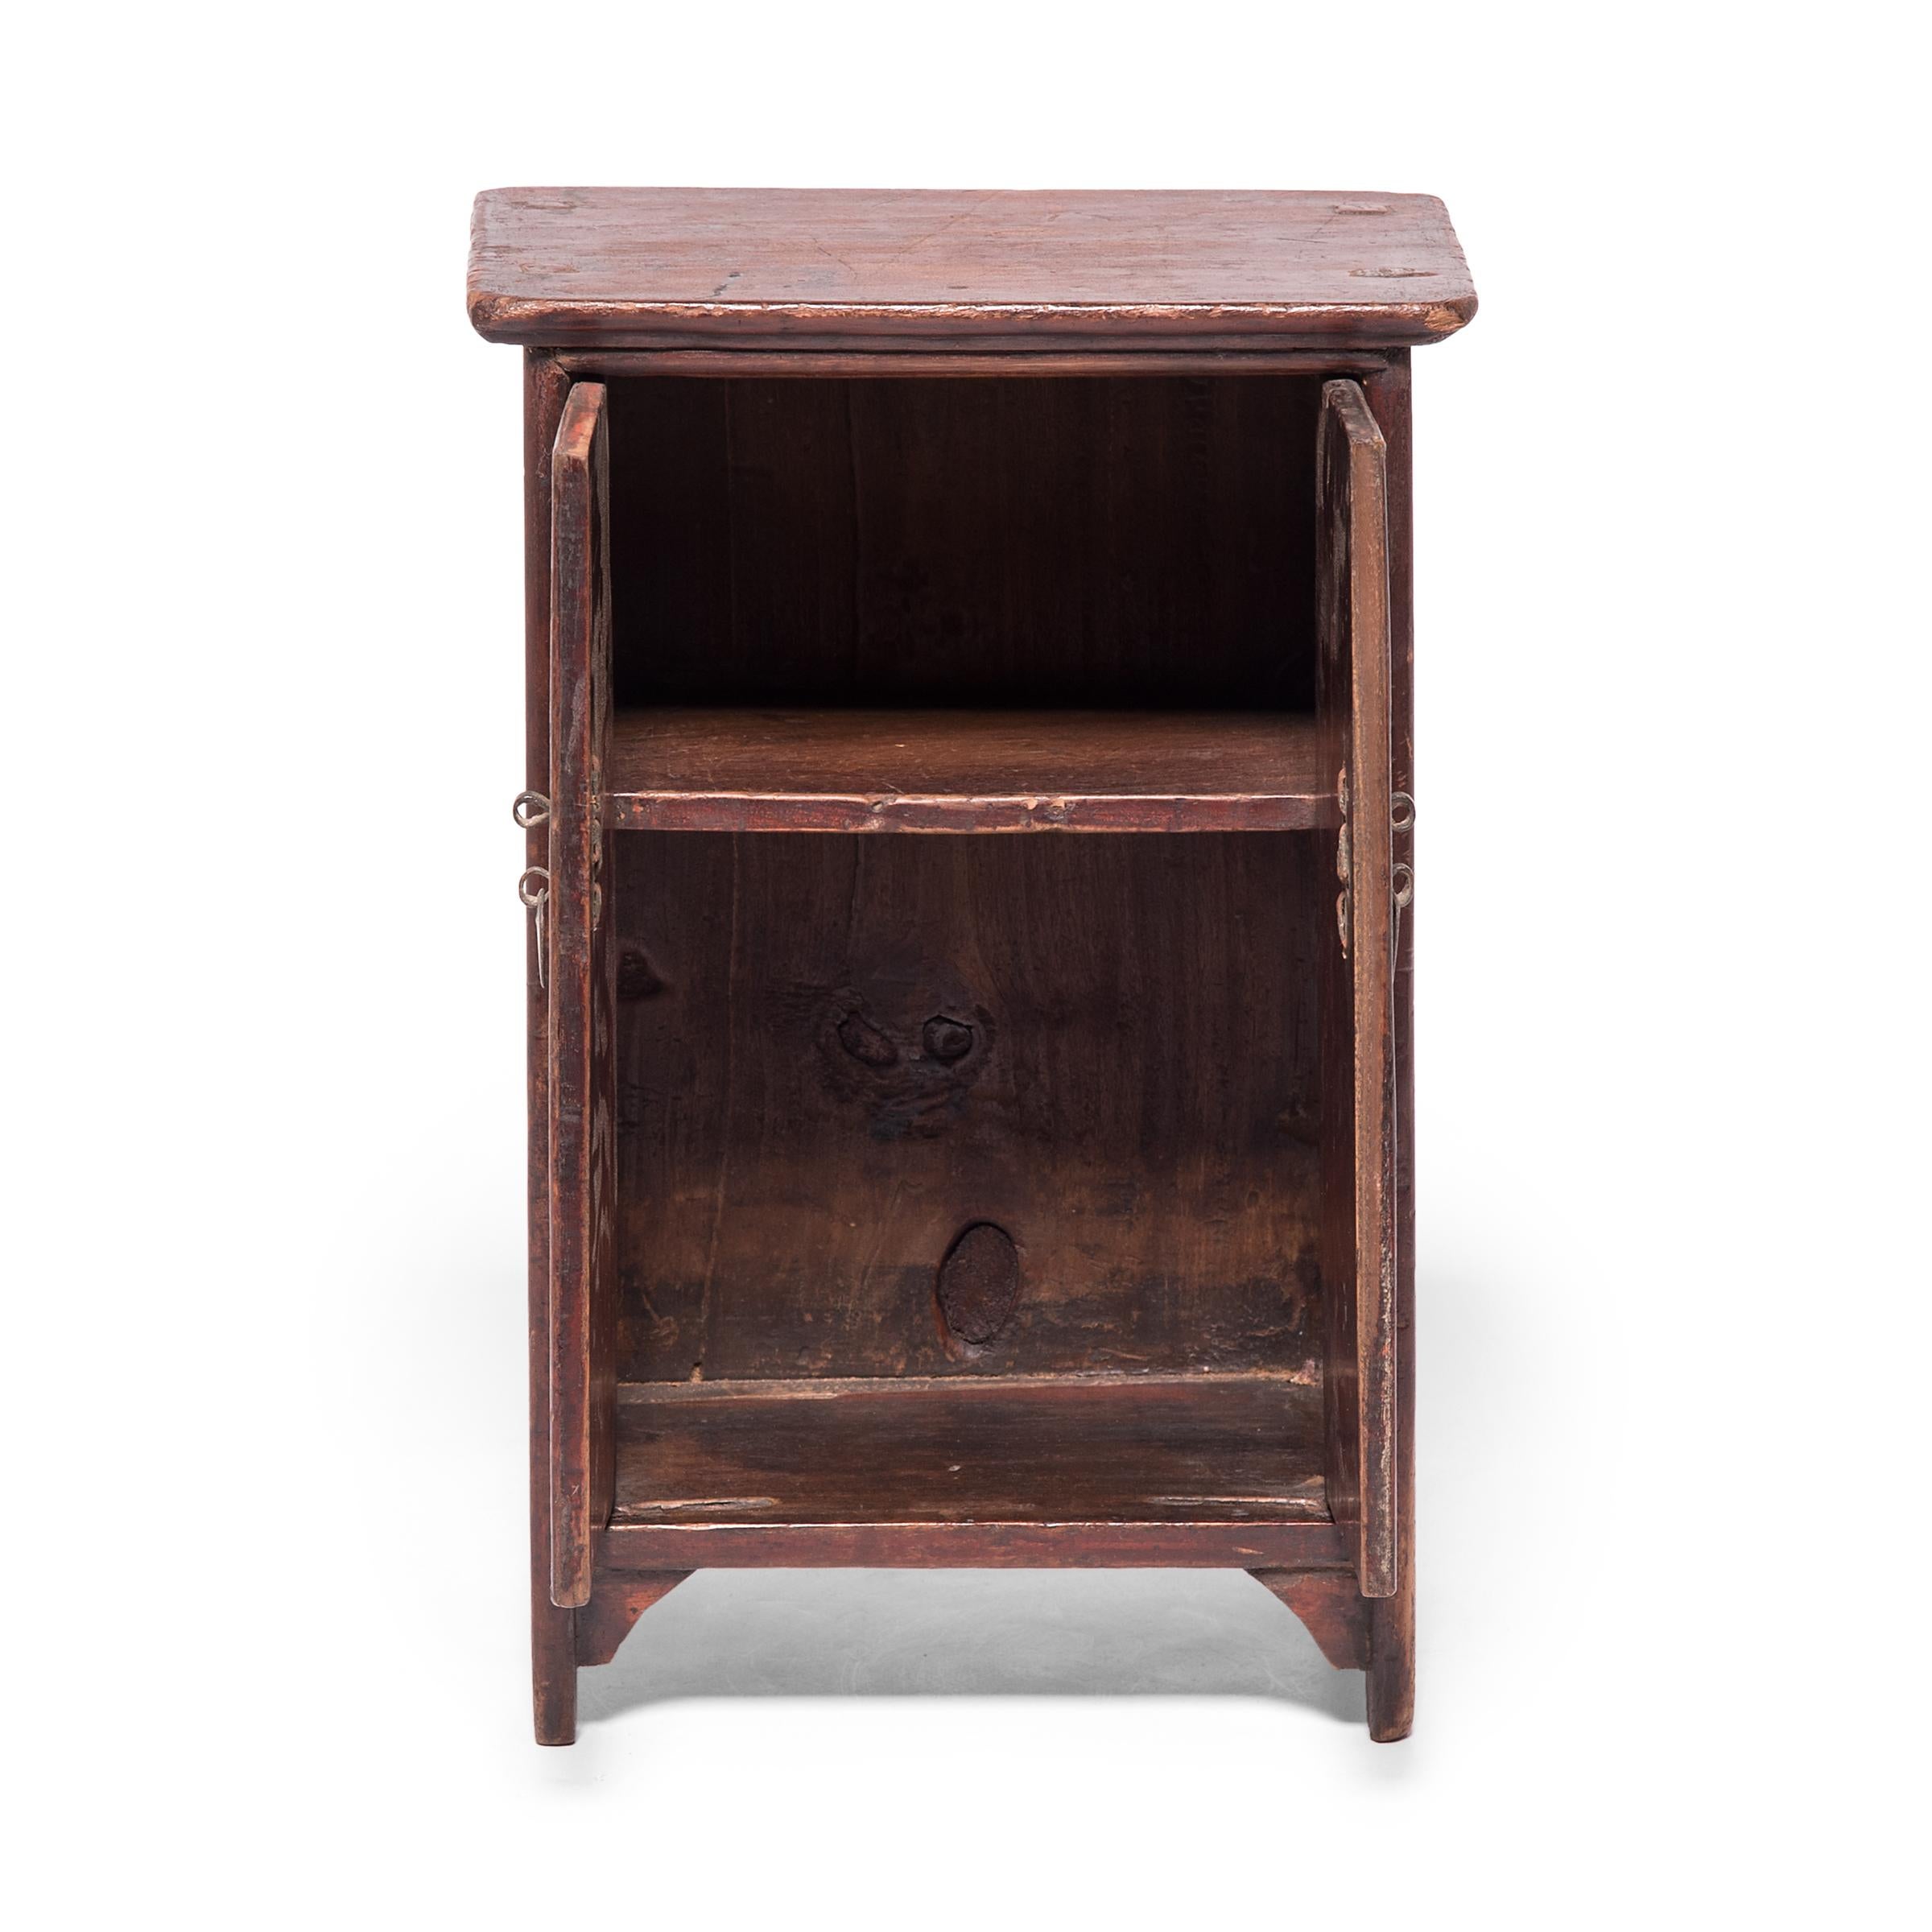 A treasure of a chest, this charming miniature cabinet is named for the narrow, rounded molding that surrounds the frame and resembles noodles. Lacquered rich red, the small cabinet exhibits the same high level of craftsmanship found in larger such